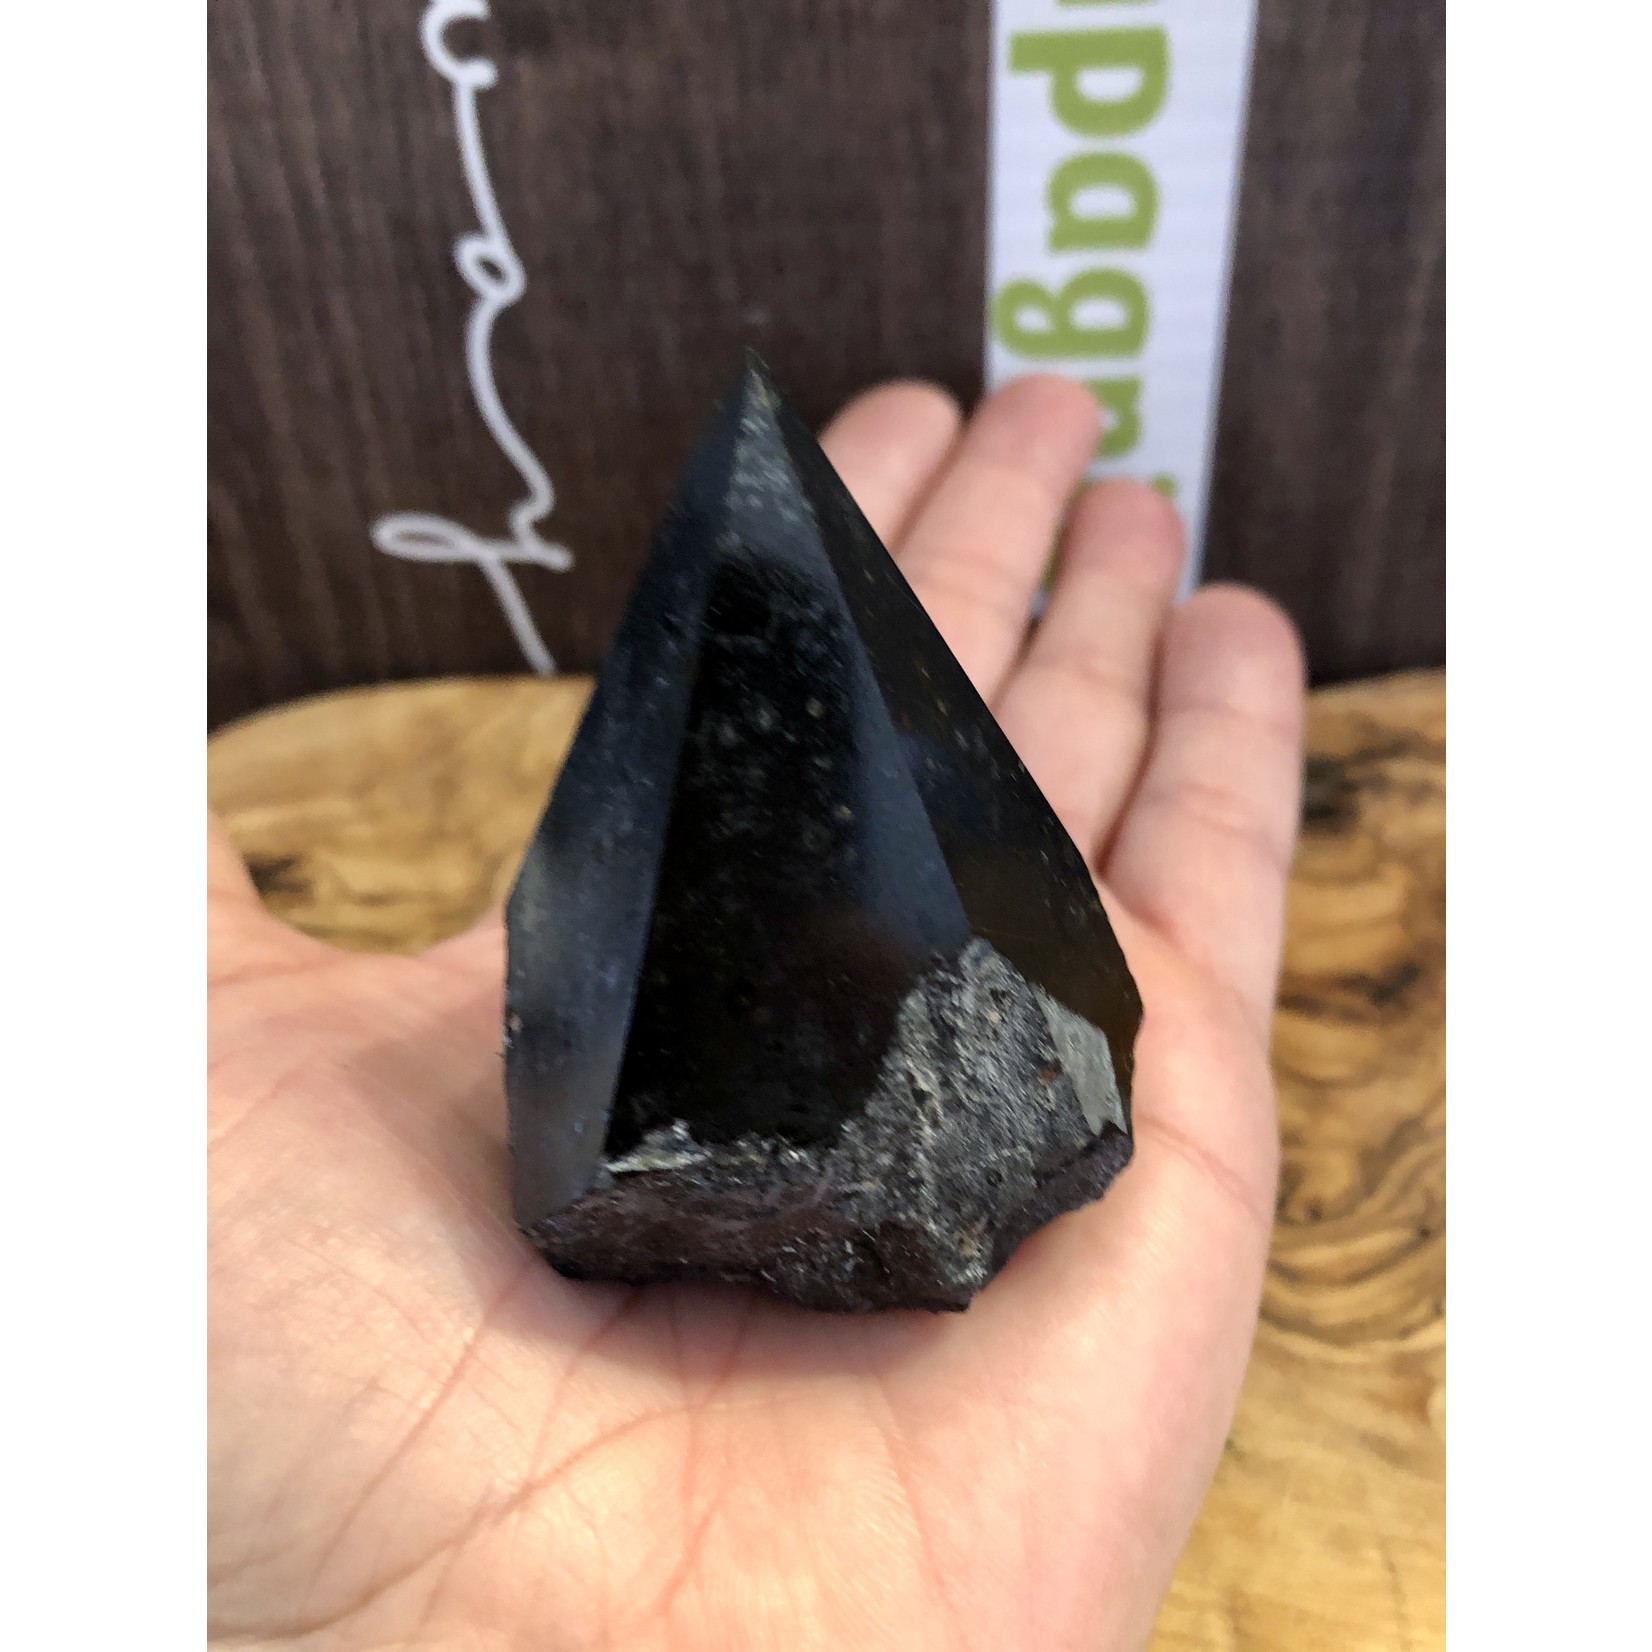 natural black tourmaline top polished, will be mainly used on the root chakra or in contact with the soles of the feet